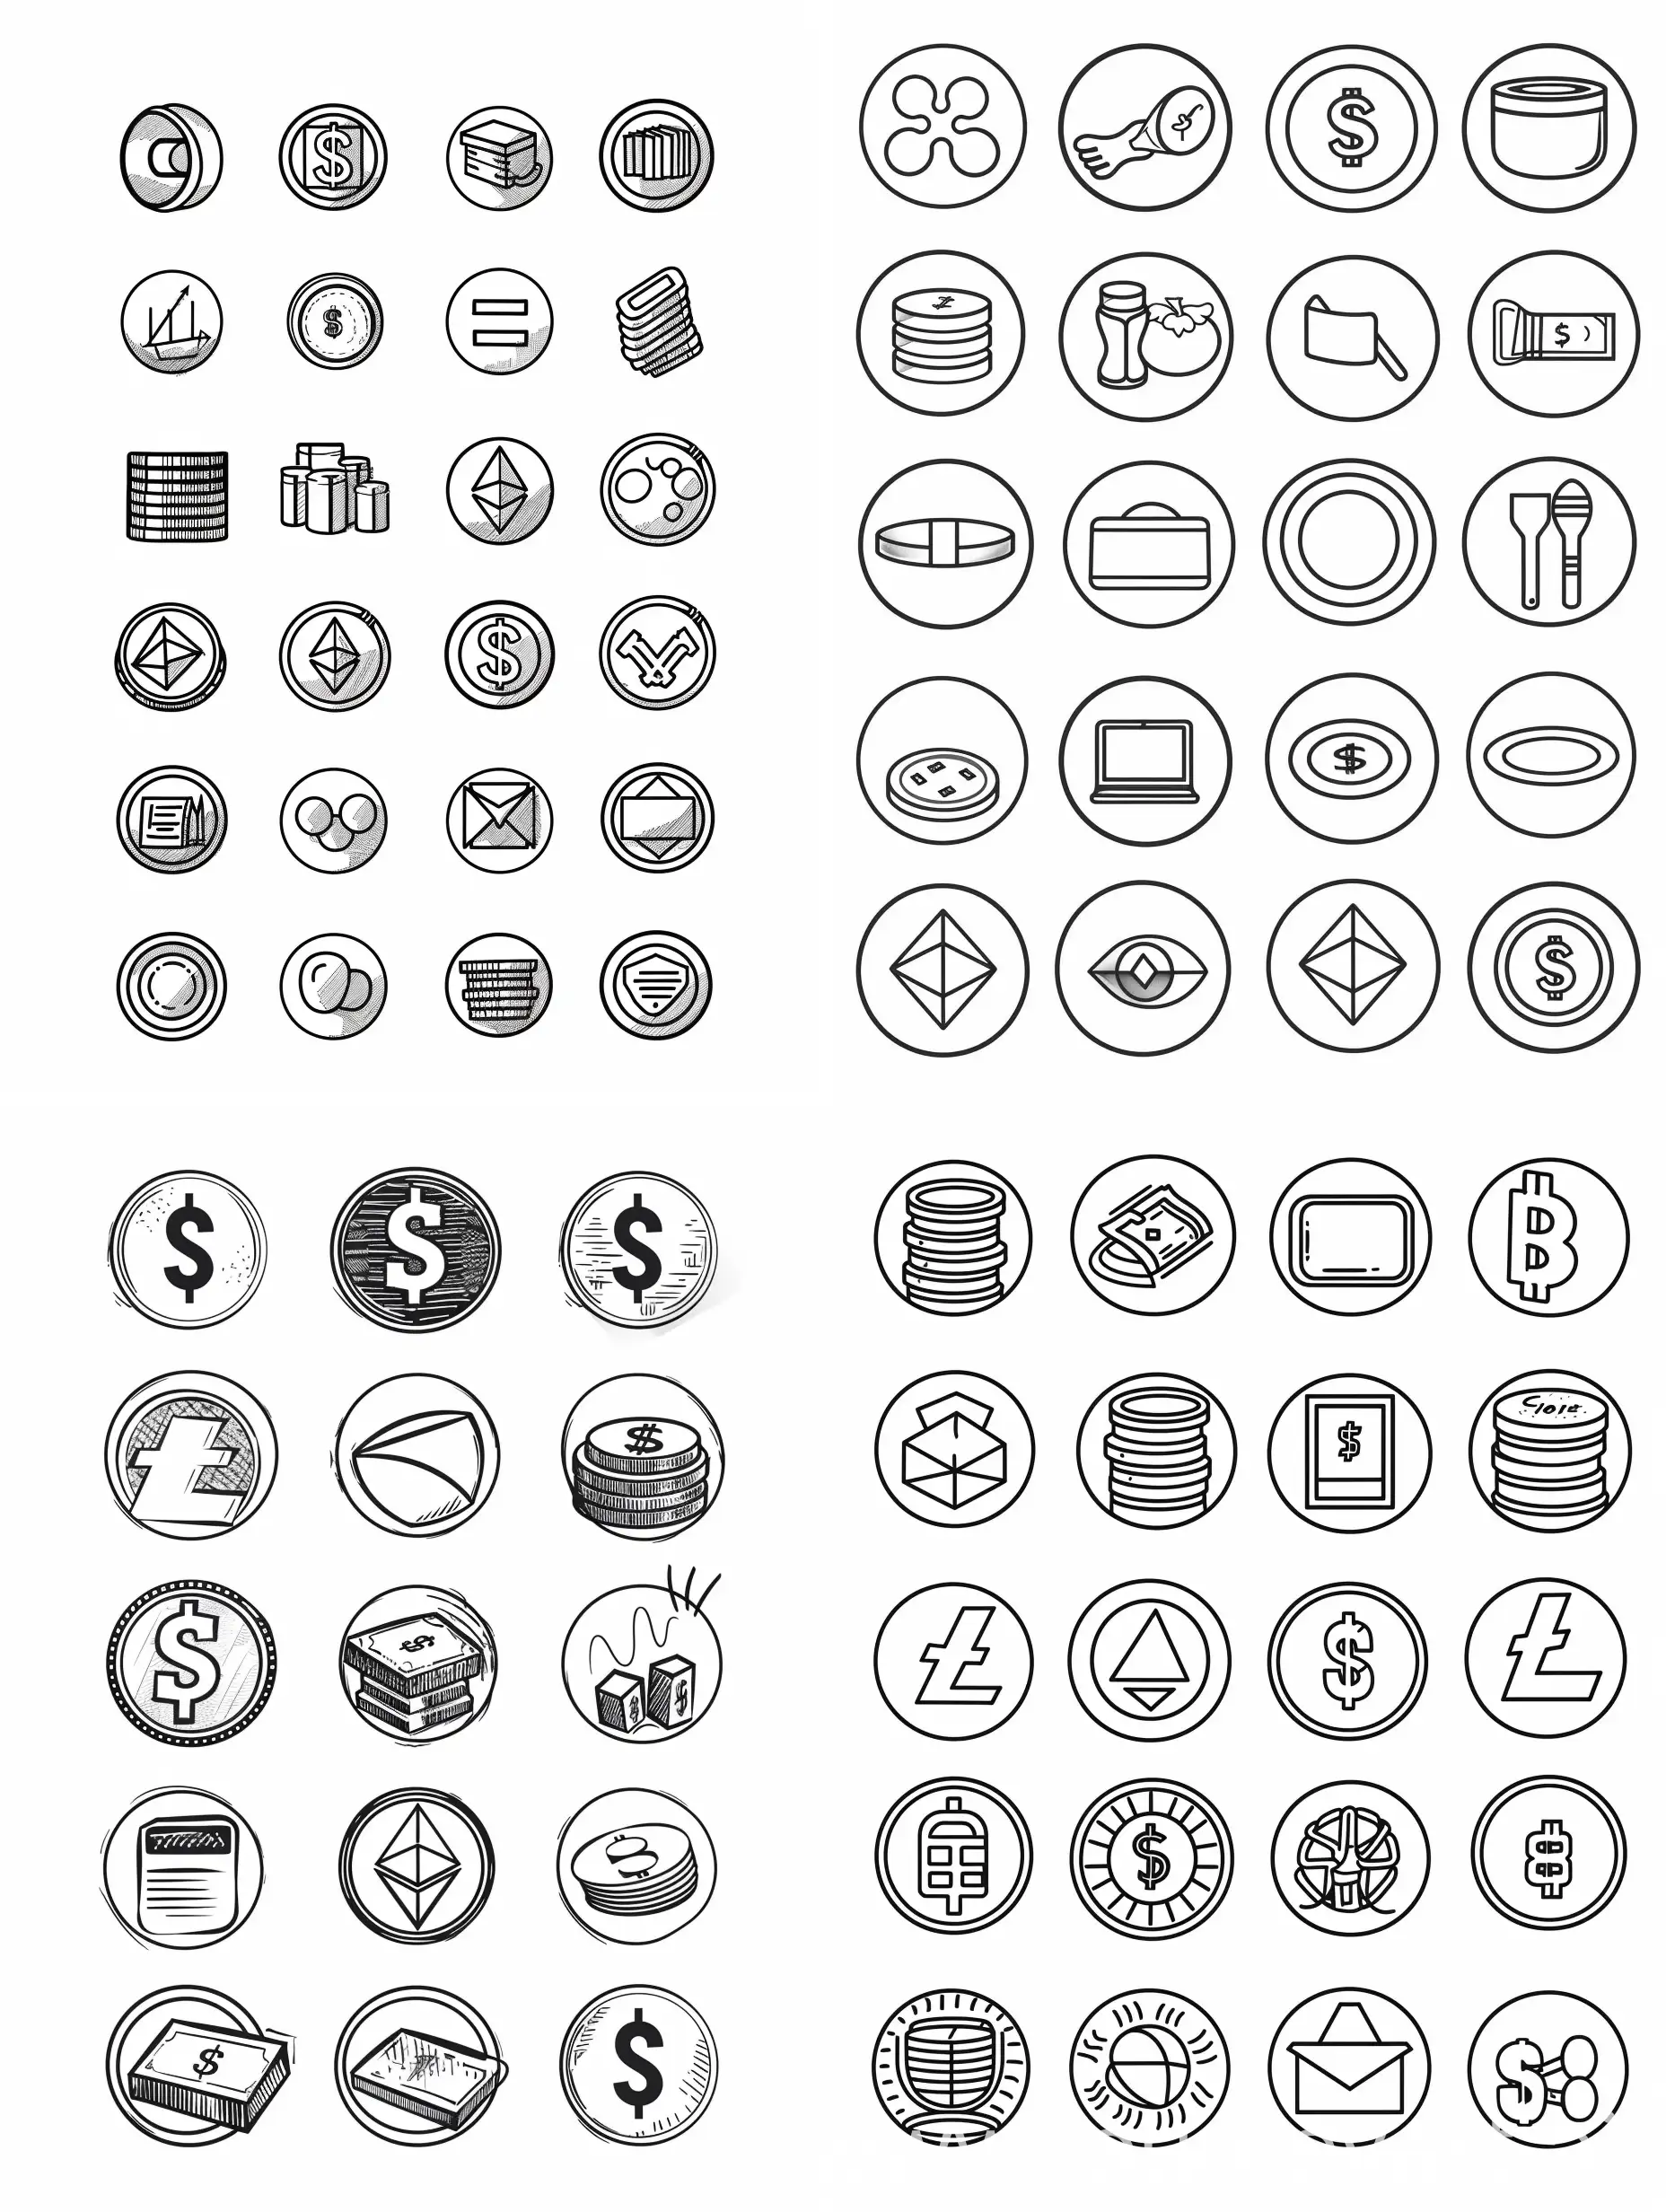 HandDrawn-Outline-Icons-of-Coins-and-Money-in-Beautiful-Circles